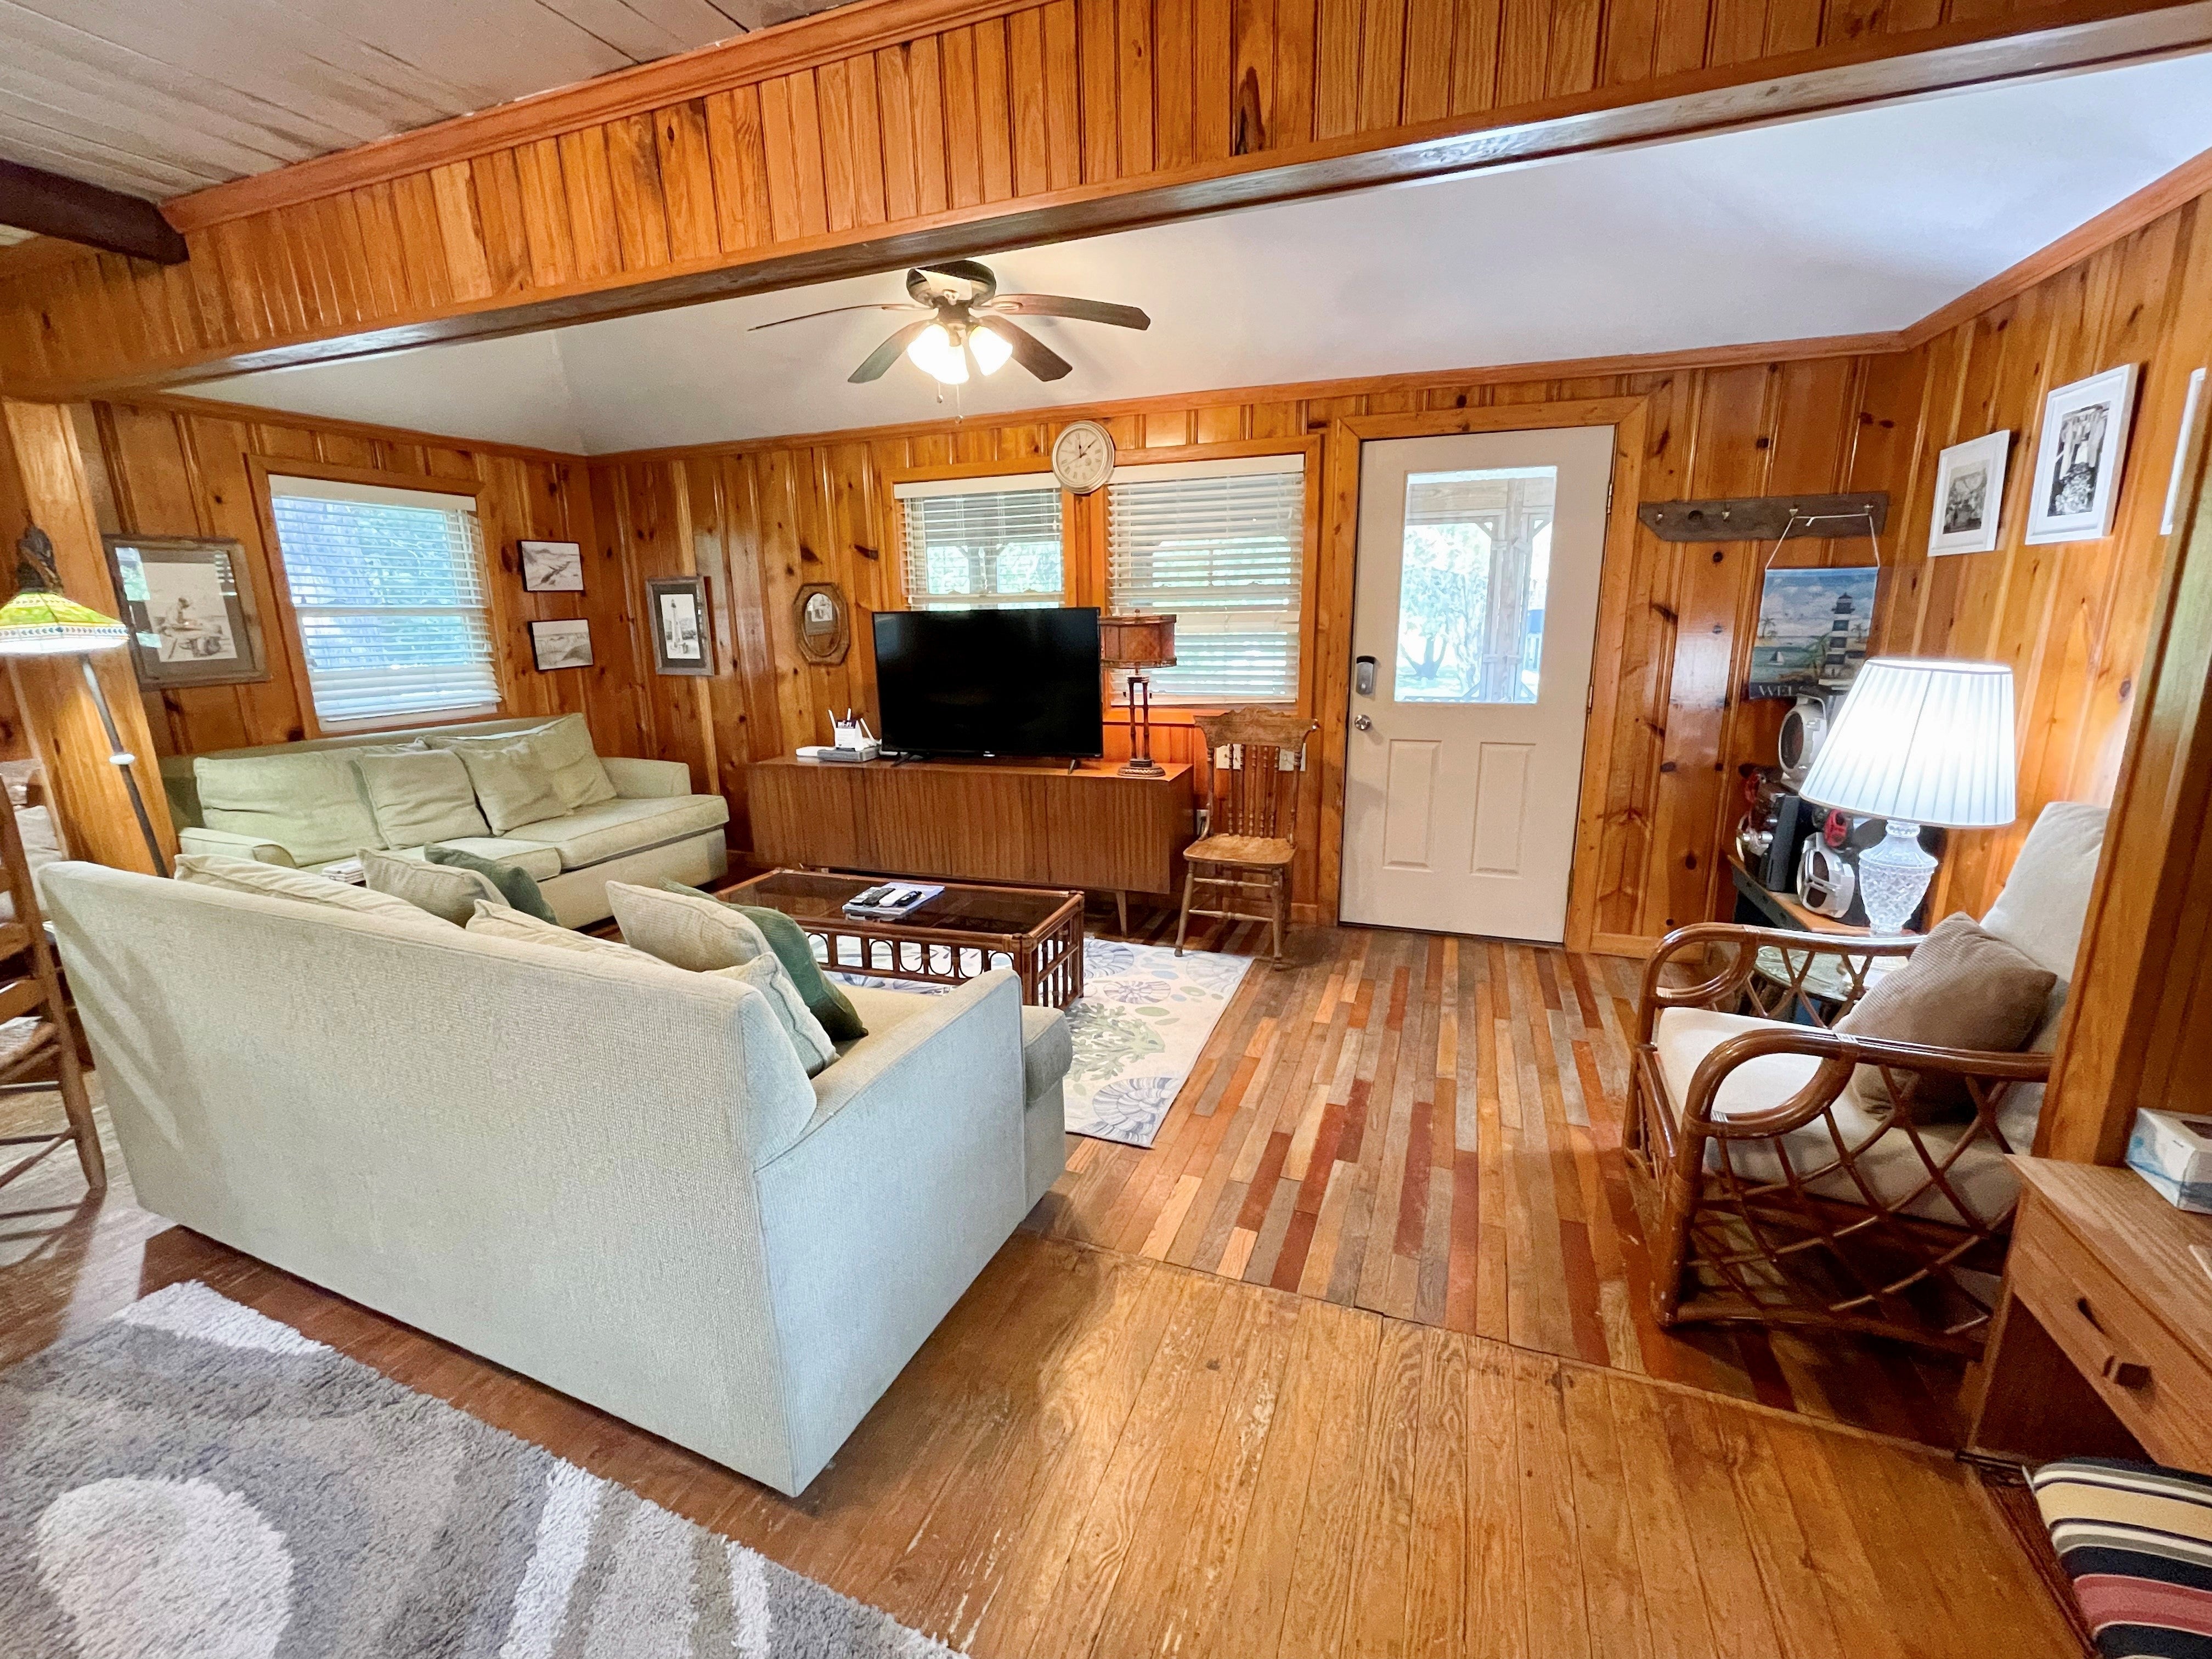 Living Area with TV, First Floor with Screened Porch Access